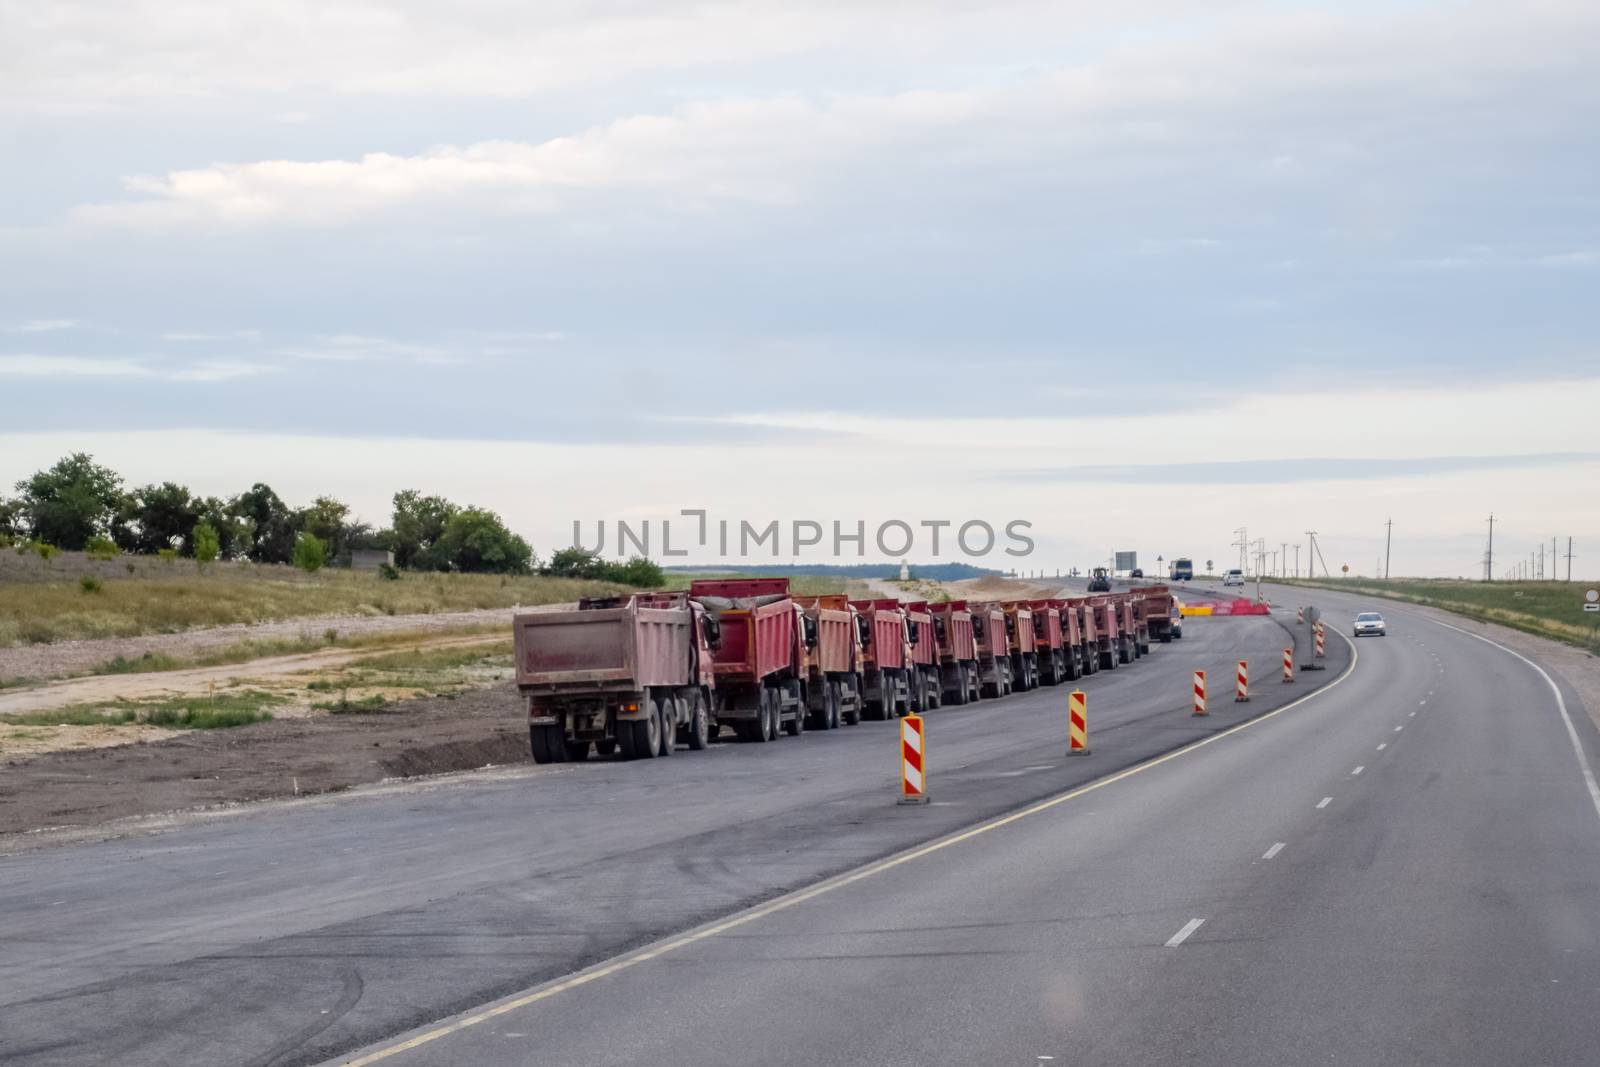 Tipper trucks are standing on the side of the road. Crimean peninsula.